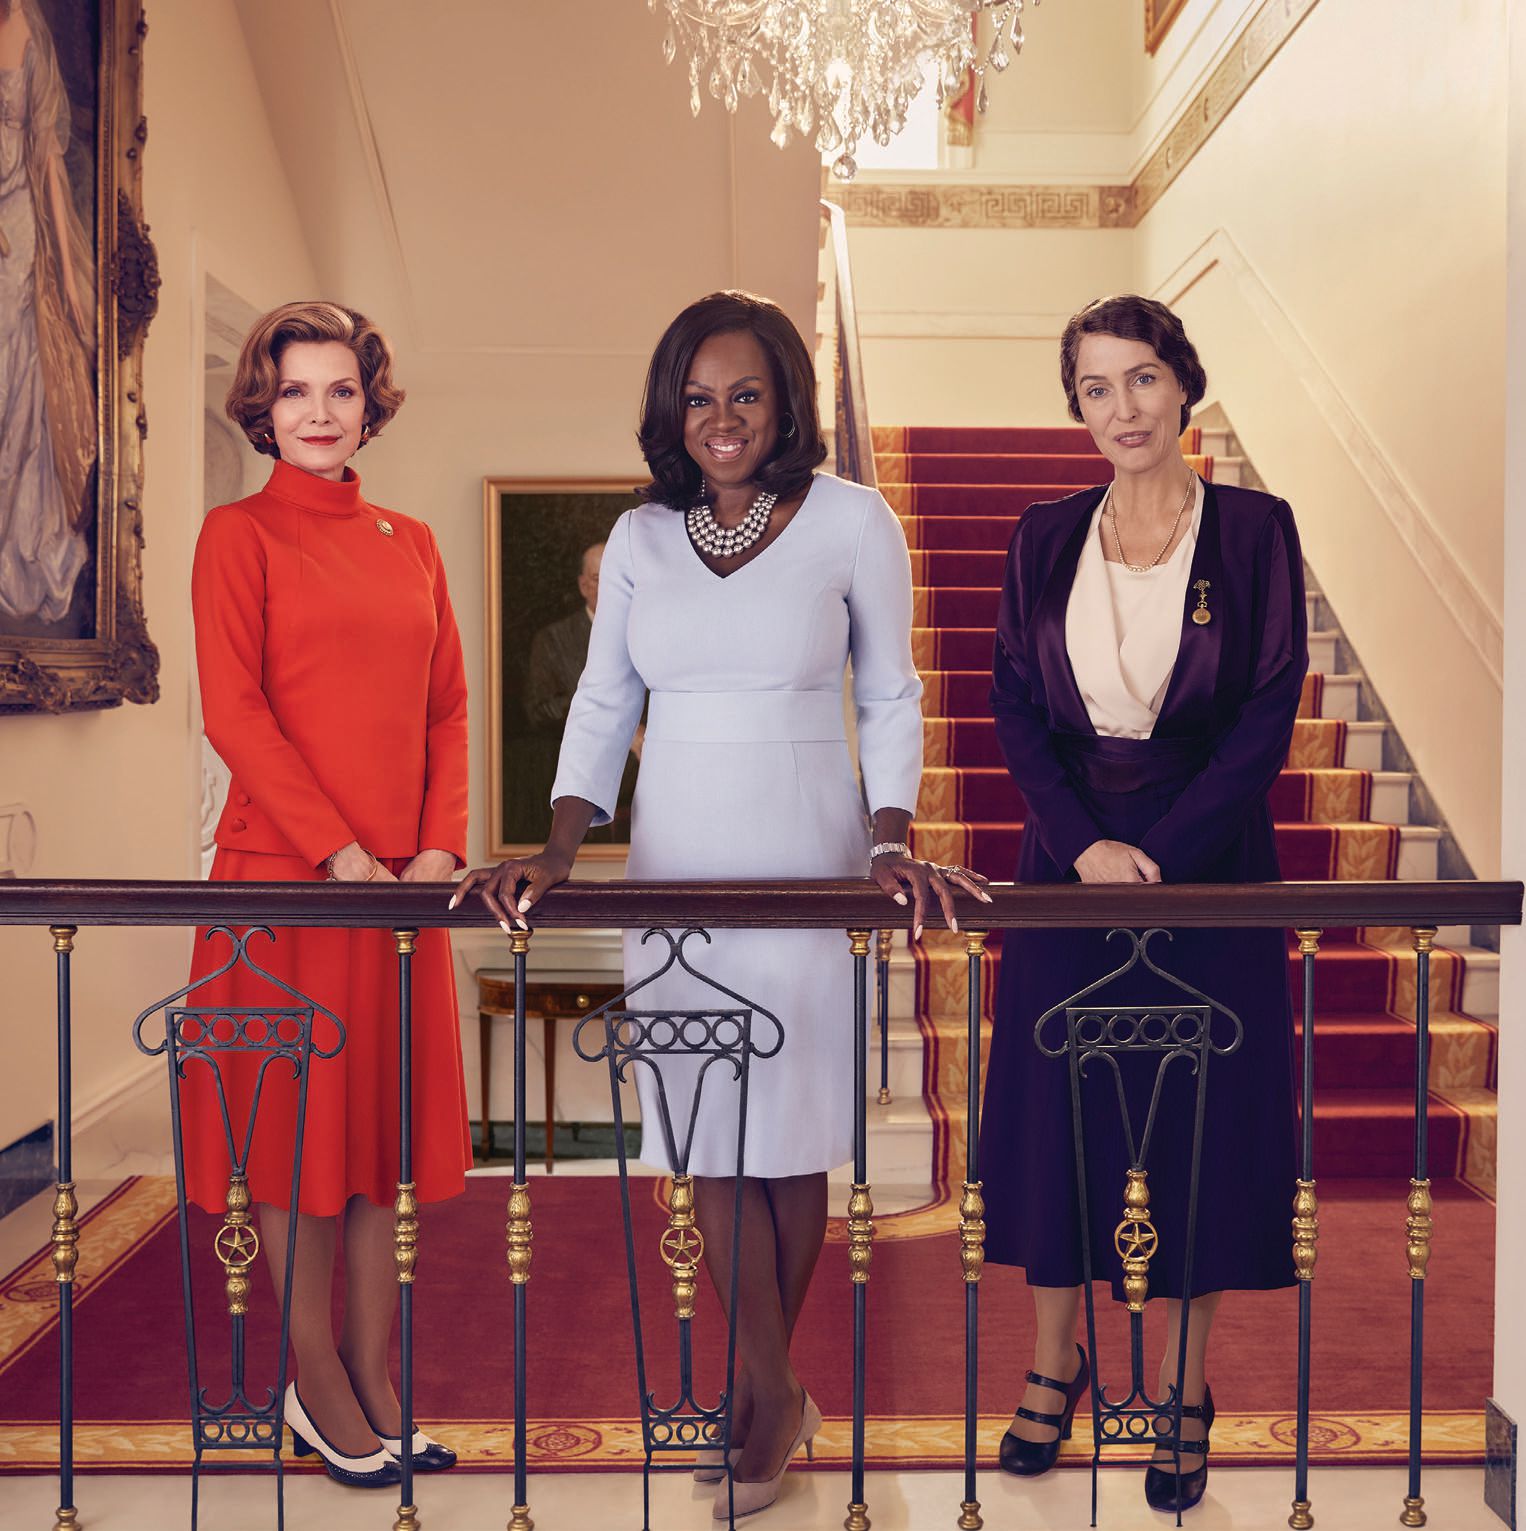 Michelle Pfeiffer, Viola Davis and Gillian Anderson star in Showtime’s The First Lady. PHOTO BY RAMONA ROSALES/SHOWTIME